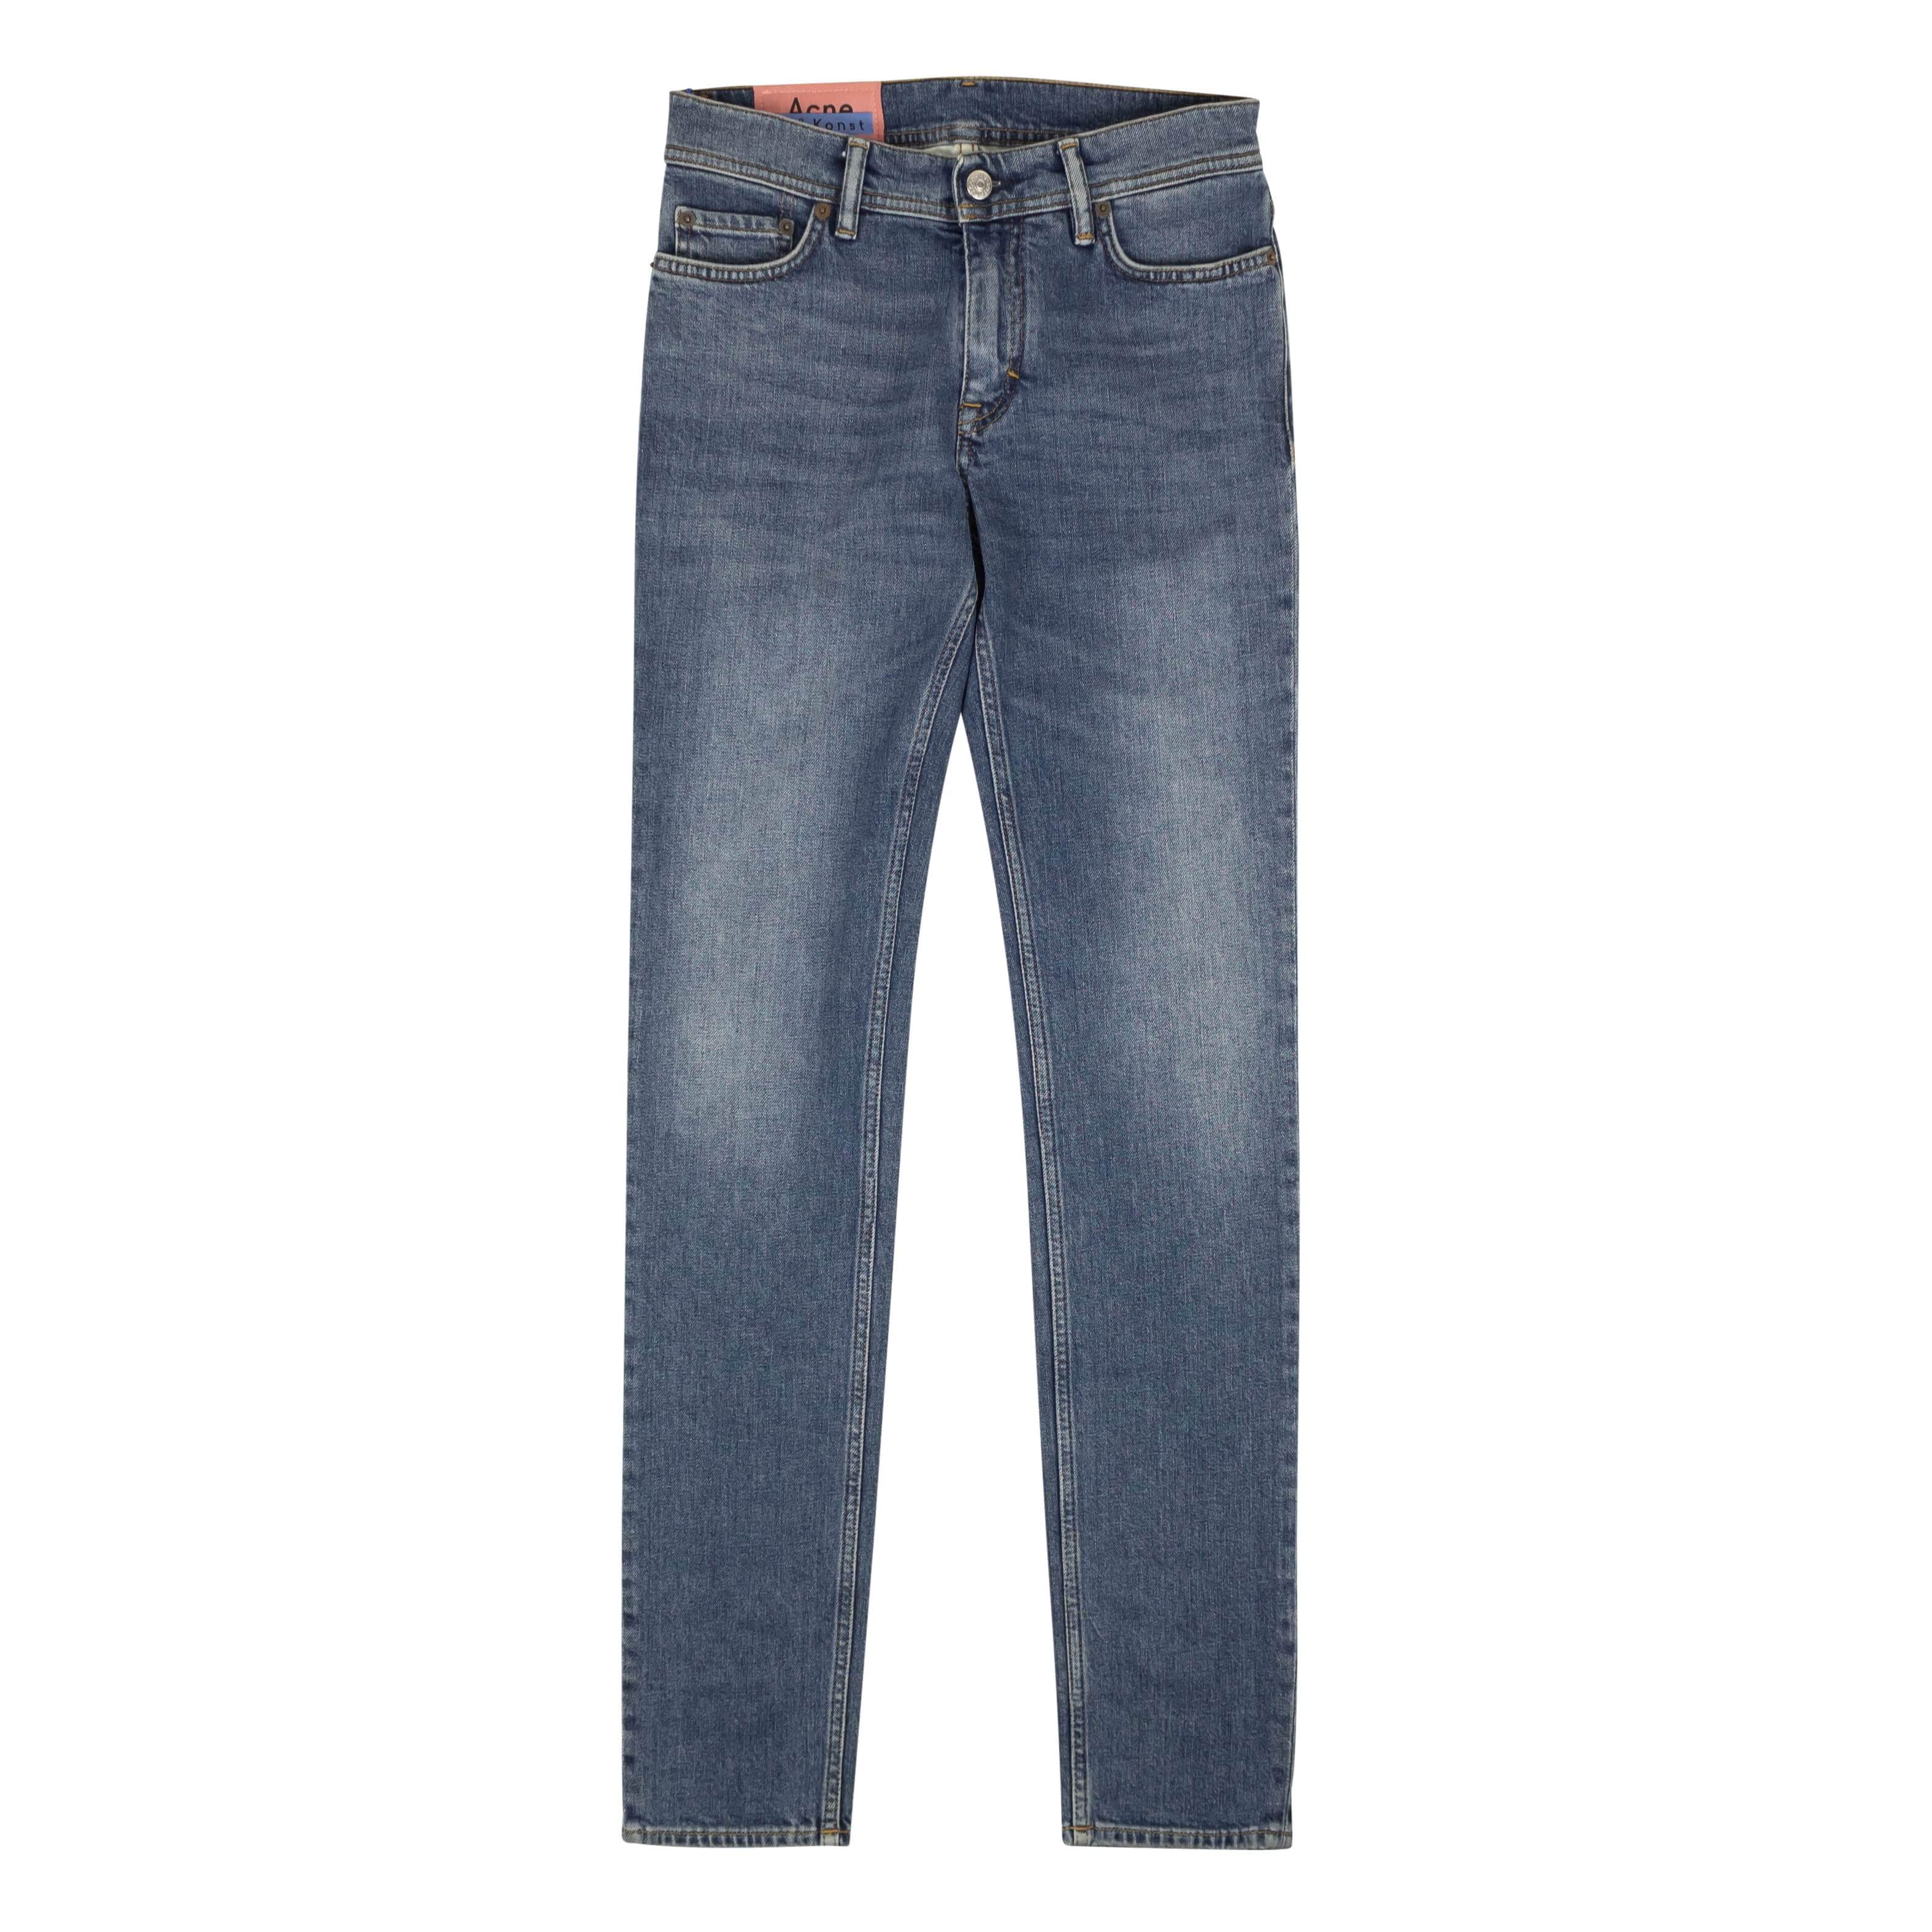 Acne Studios acne-studios, channelenable-all, chicmi, couponcollection, gender-mens, main-clothing, mens-shoes, mens-straight-fit-jeans, size-28, size-29, size-30, size-31, size-33, size-34, under-250 Mid Blue North Denim Jeans